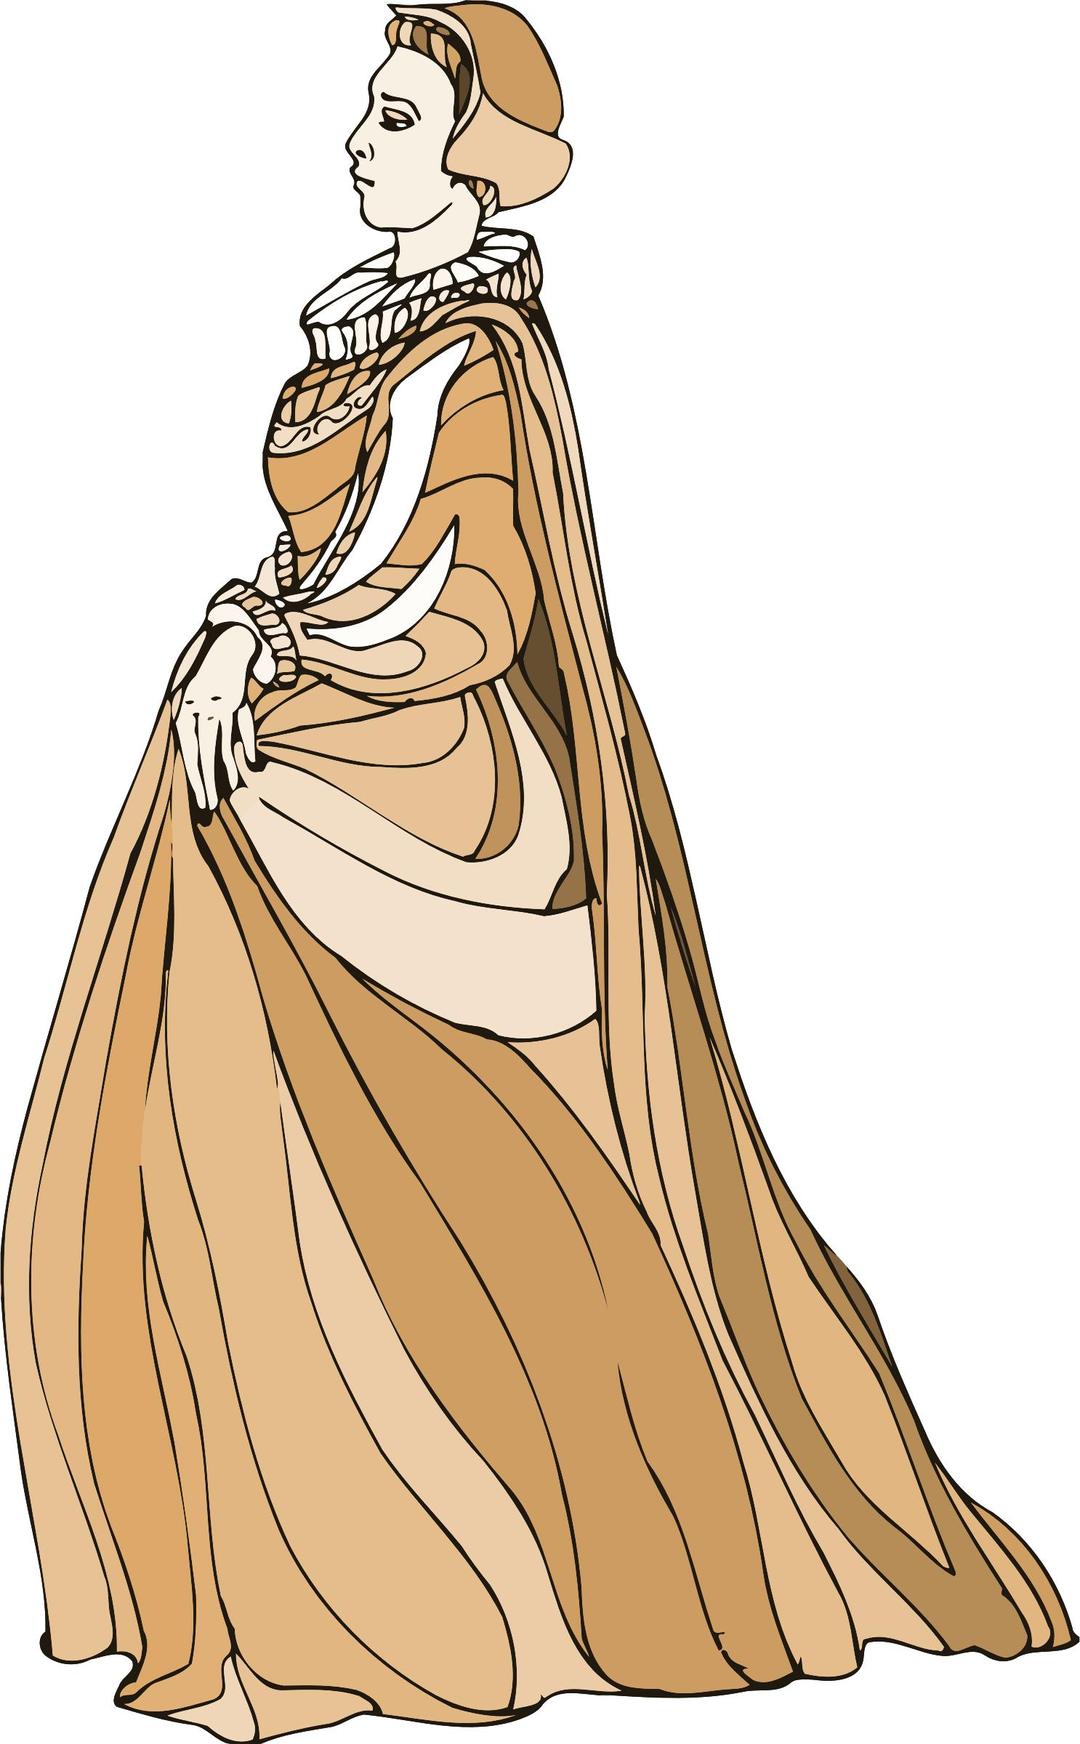 Shakespeare characters - Olivia png transparent